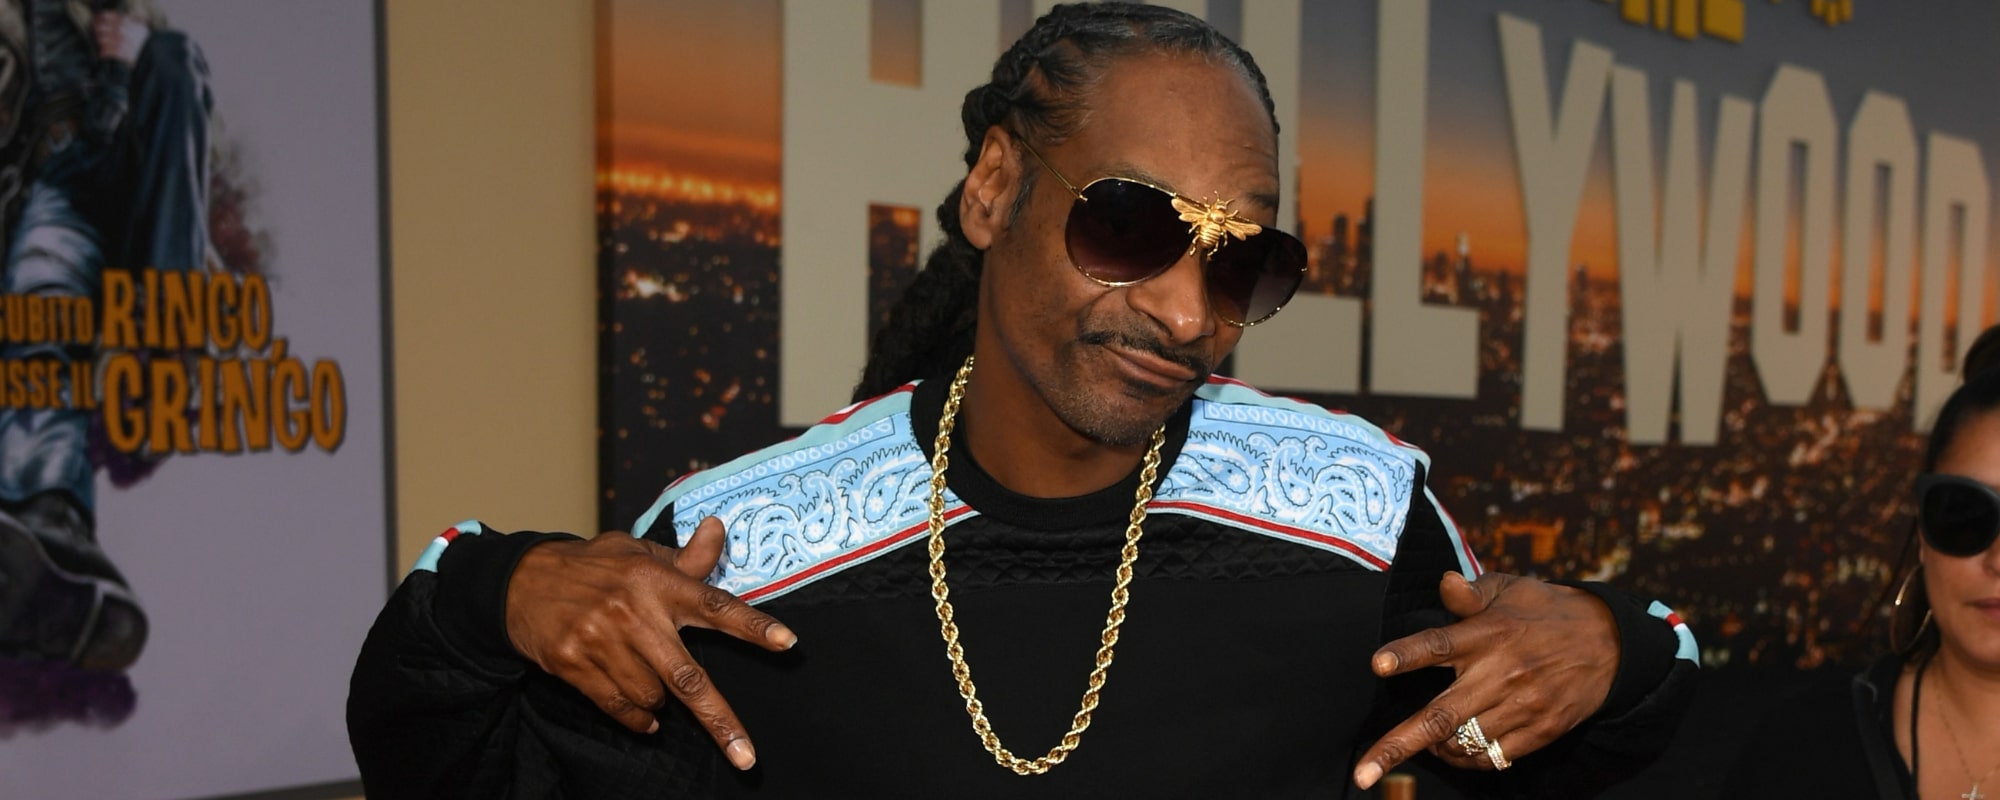 Snoop Dogg Opens Up About Being a Coach on the Next Season of ‘The Voice’: “I’m the People’s Champ”